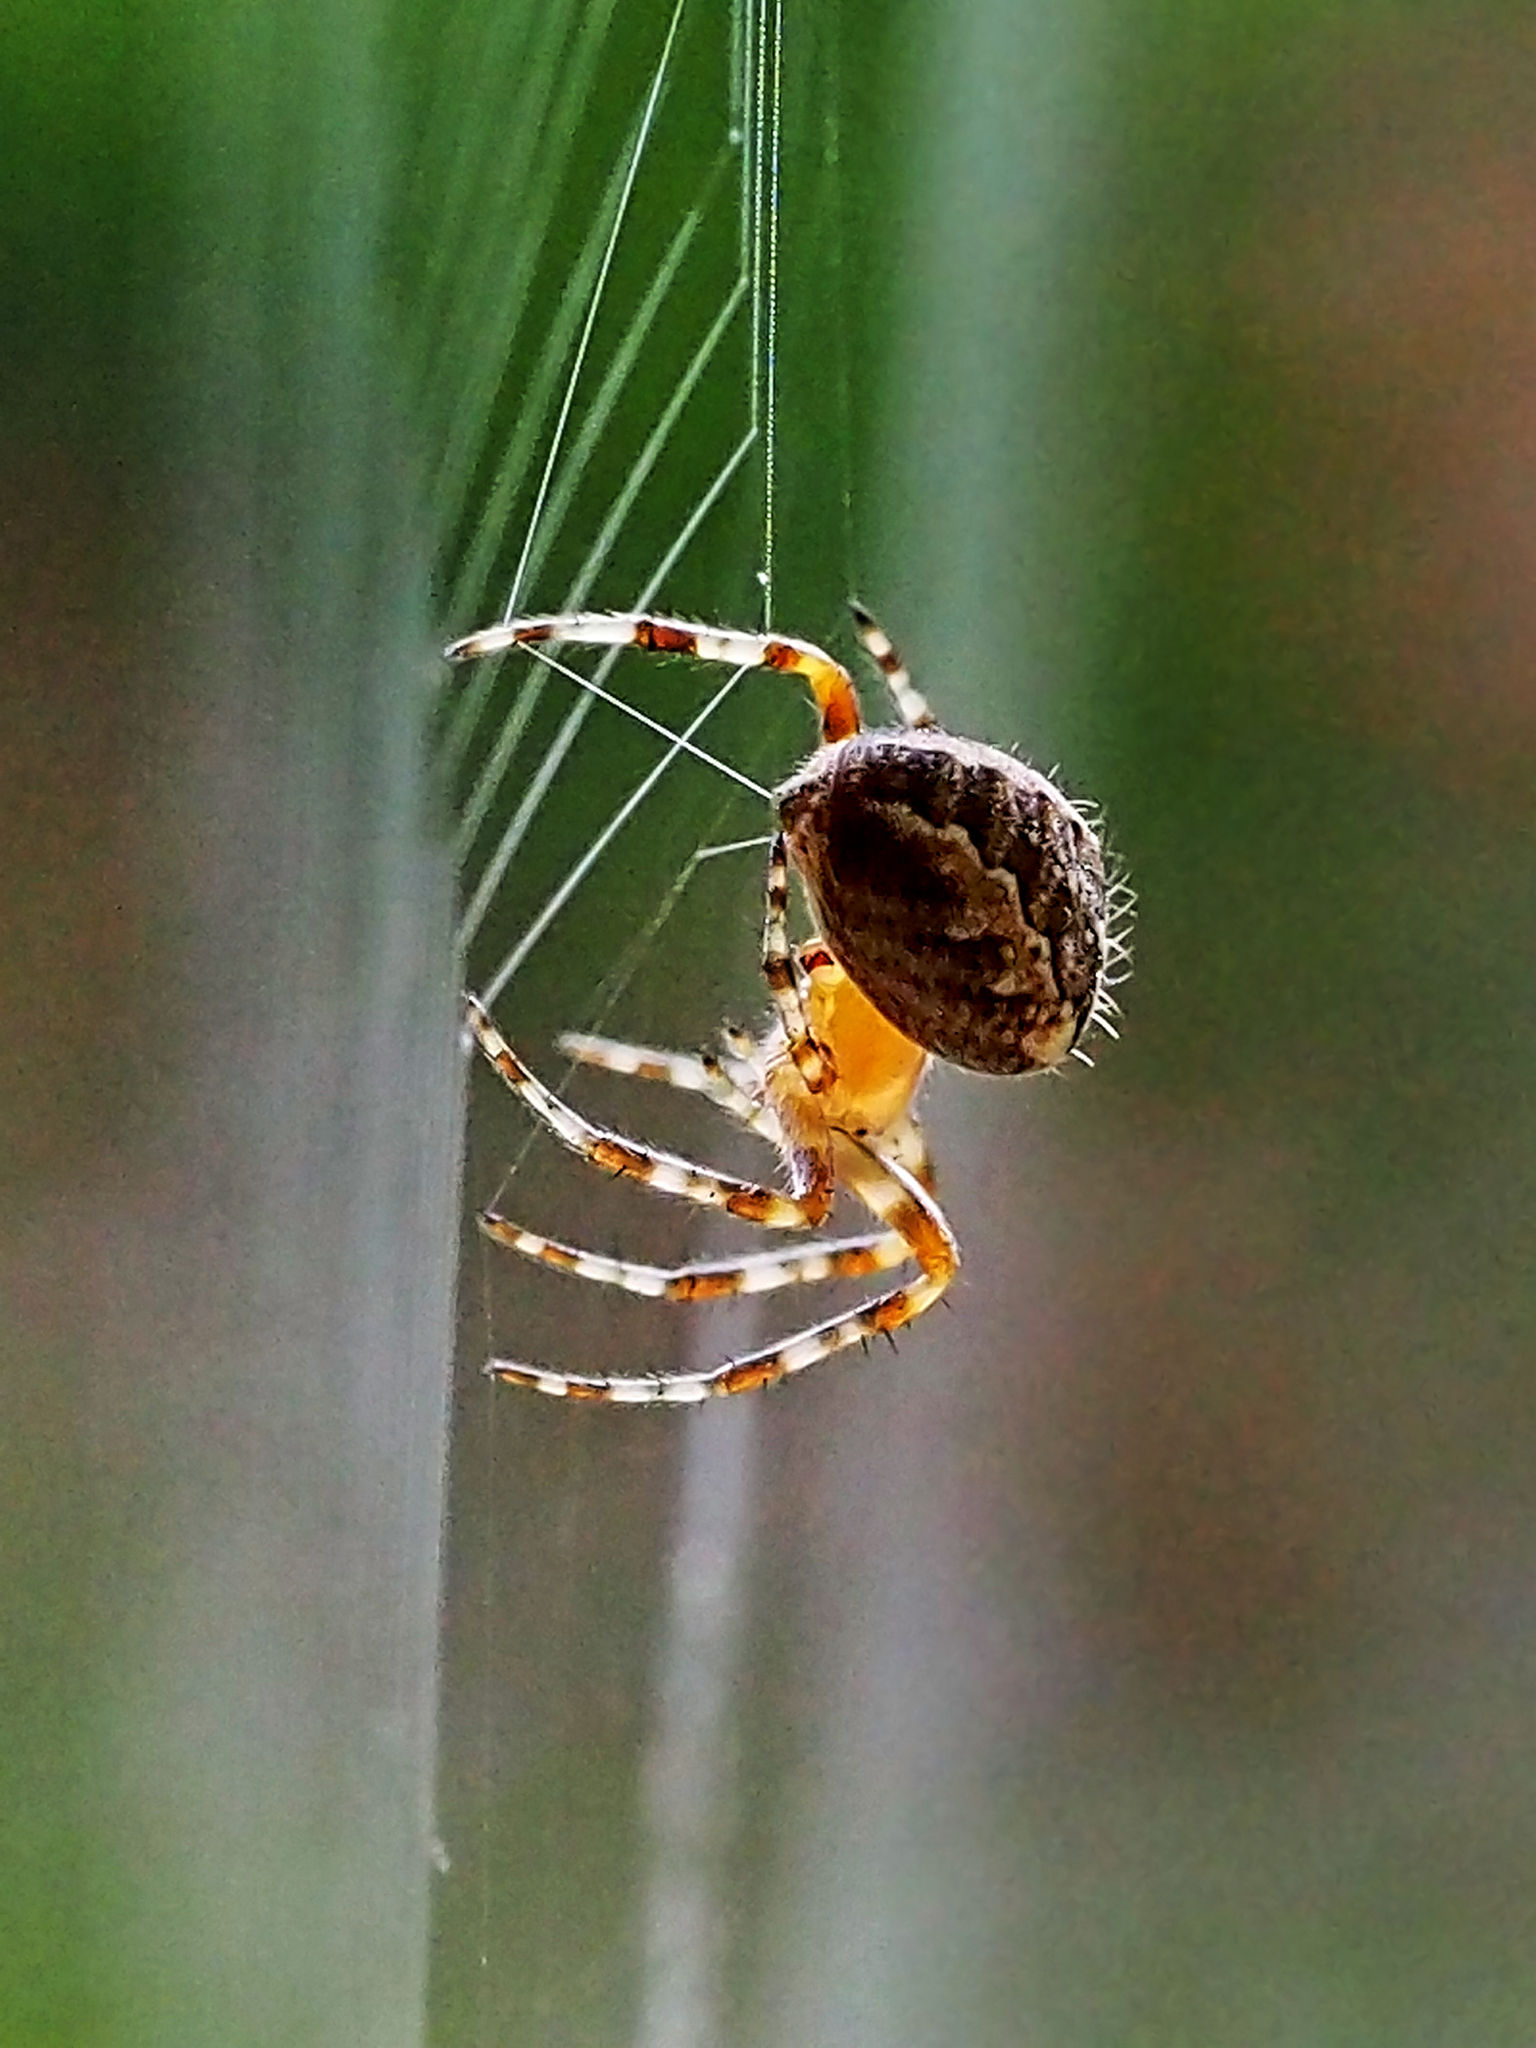 Spider genes put a new spin on arachnids' potent venoms, stunning silks,  and surprising history, Science